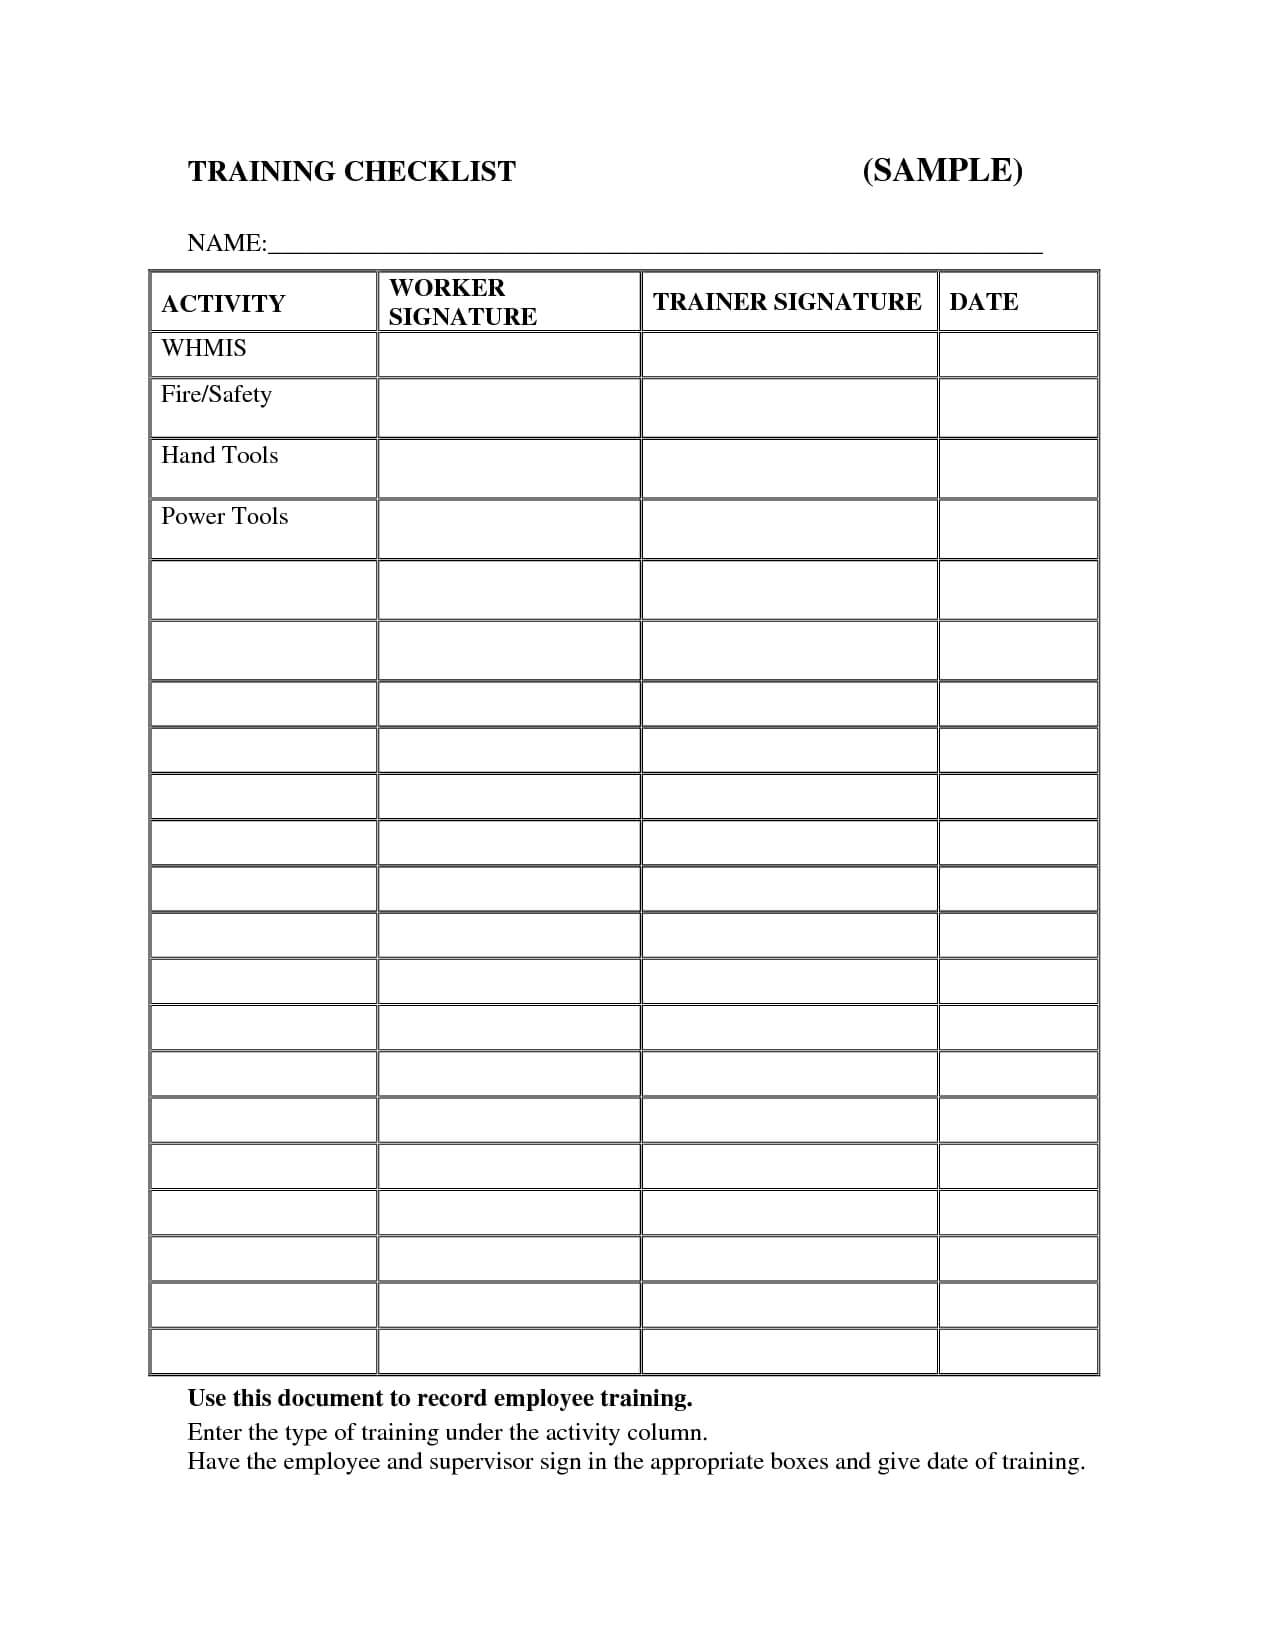 Trainingklist Template Word Excel Employee Safety Training Within Training Documentation Template Word